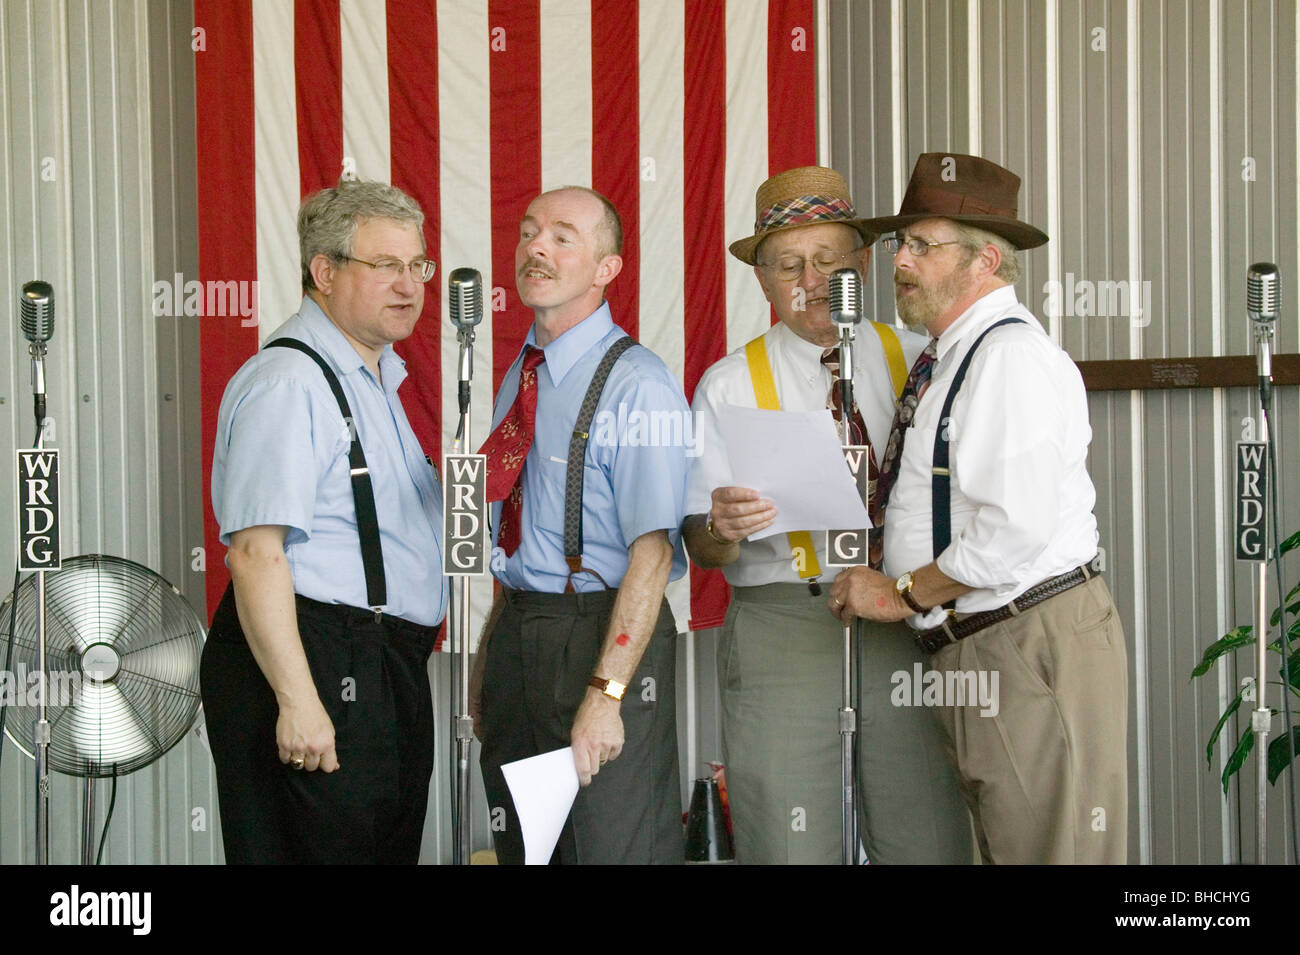 1940s radio theater actors at Mid-Atlantic Air Museum World War II Weekend and Reenactment in Reading, PA held June 18, 2008 Stock Photo